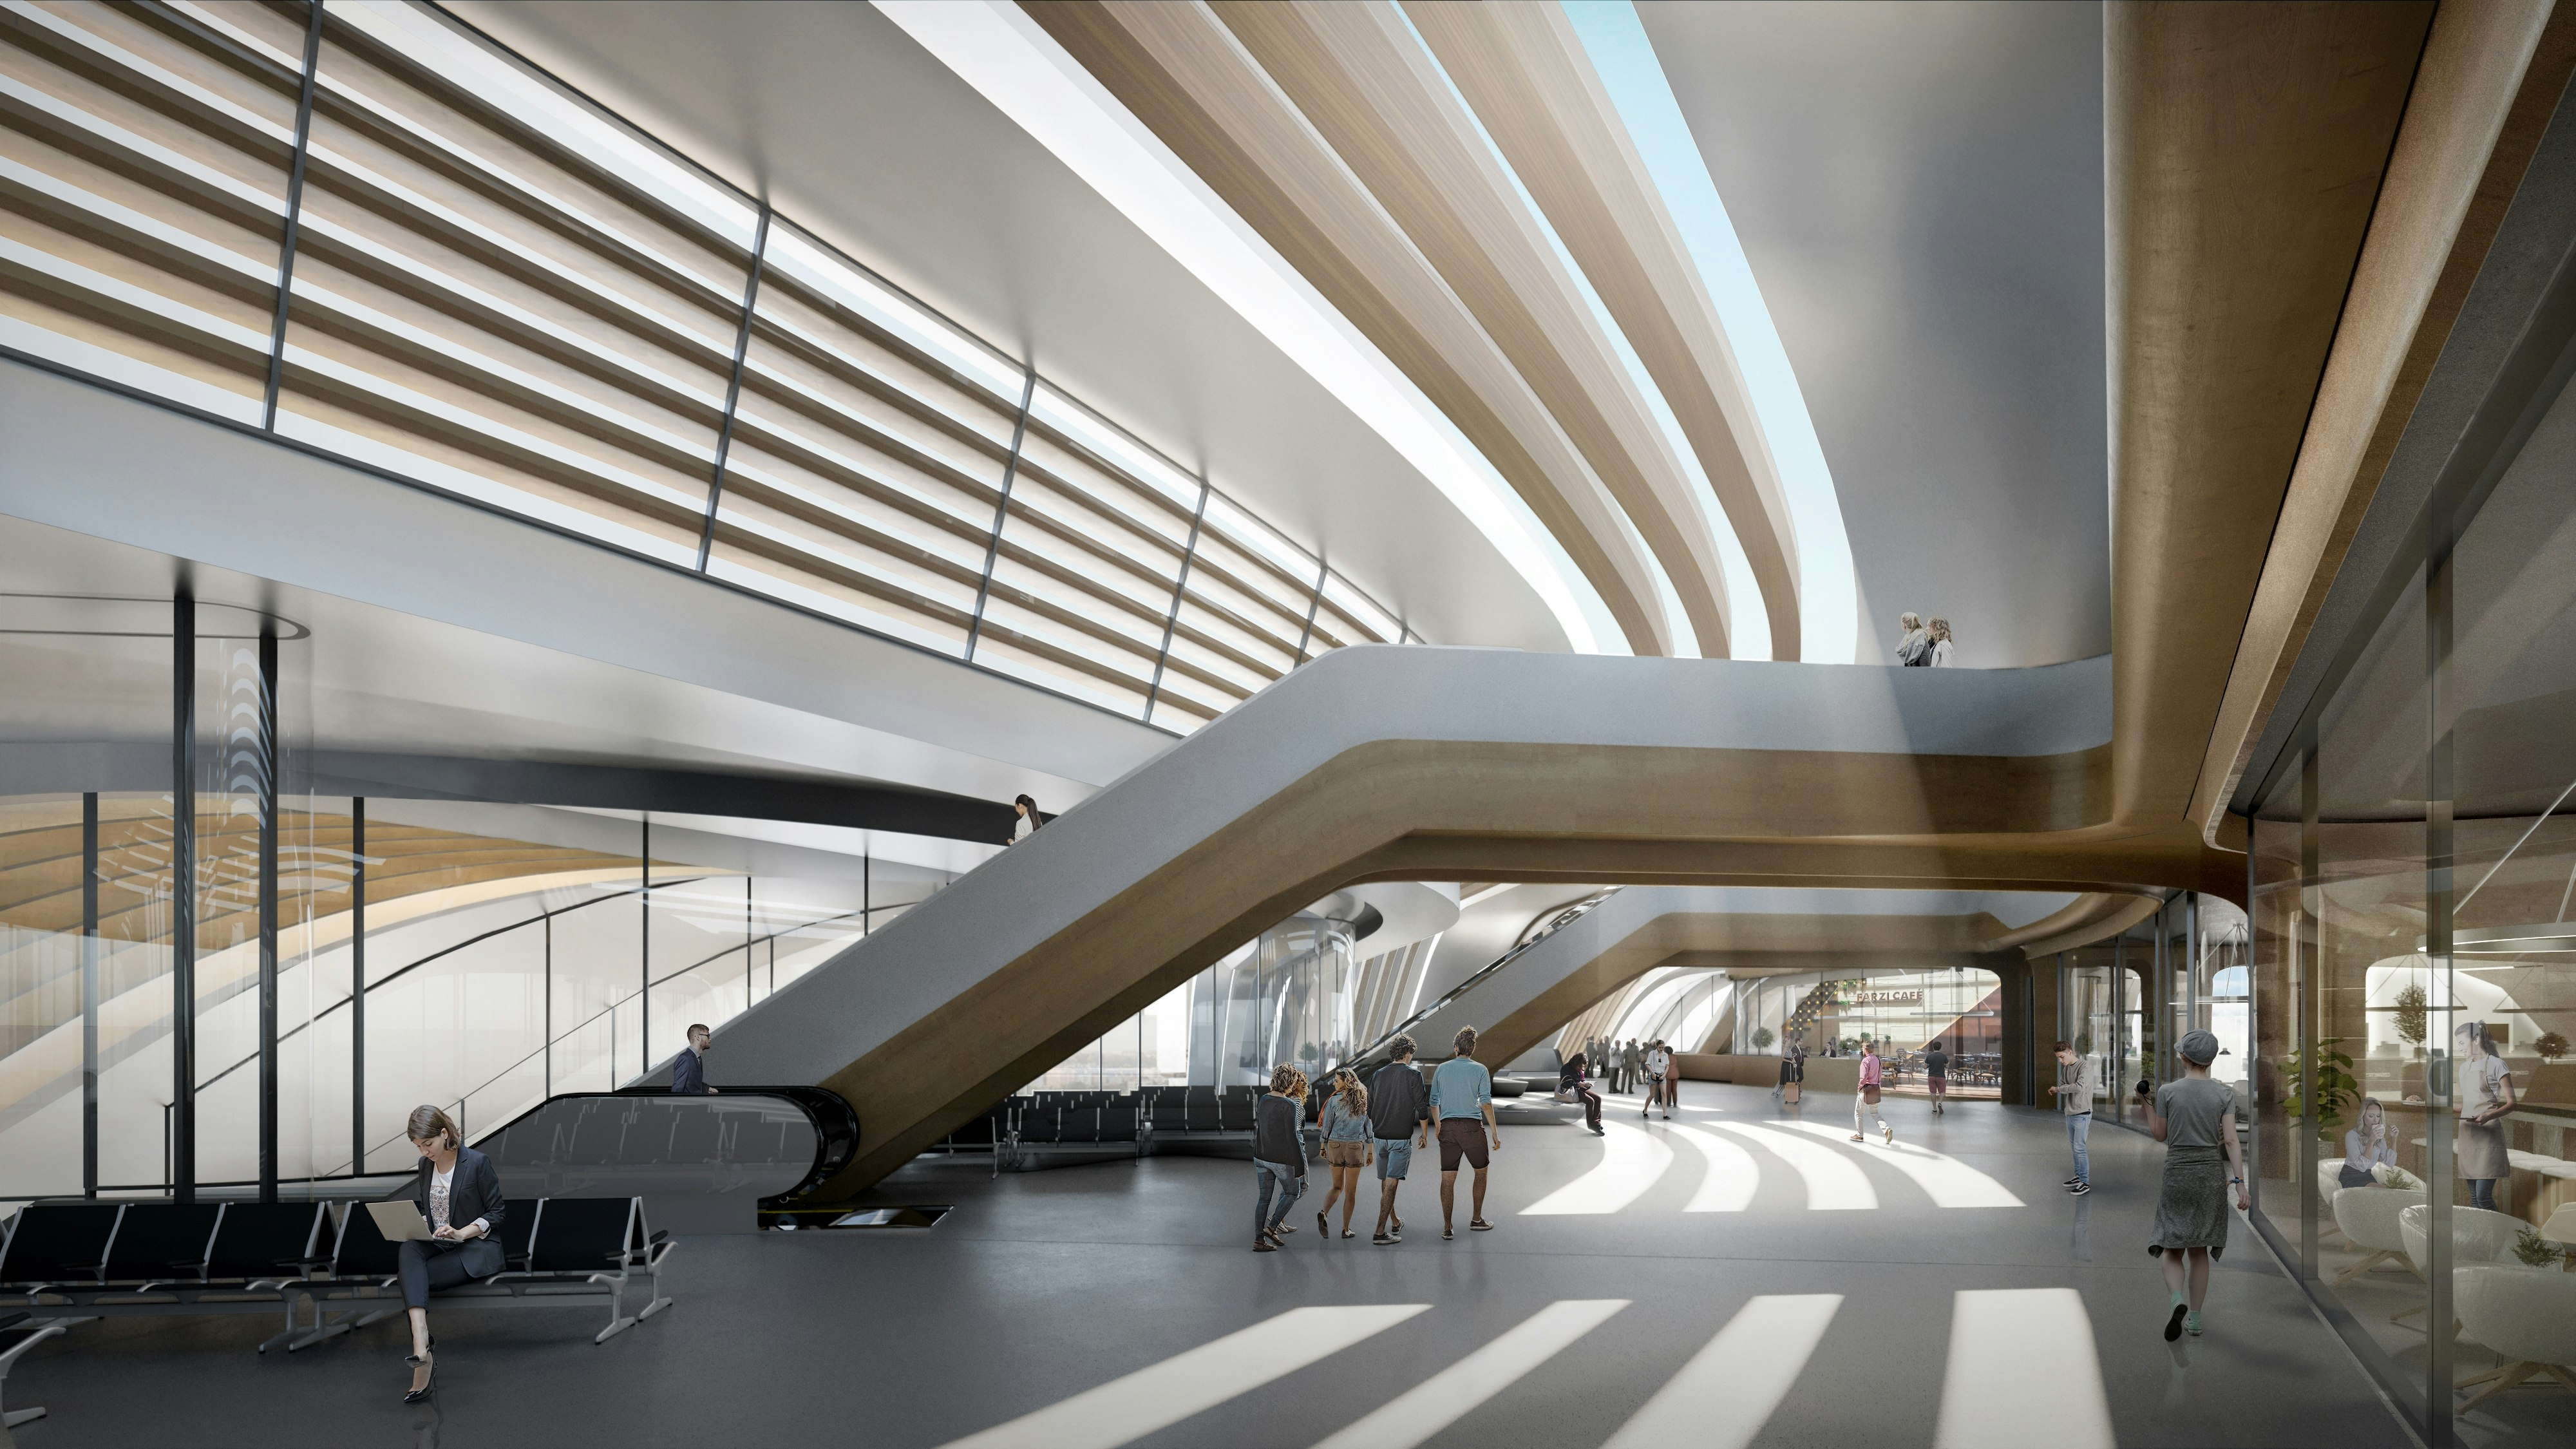 A rendering of the terminal for Eastern Europe's new high-speed rail network